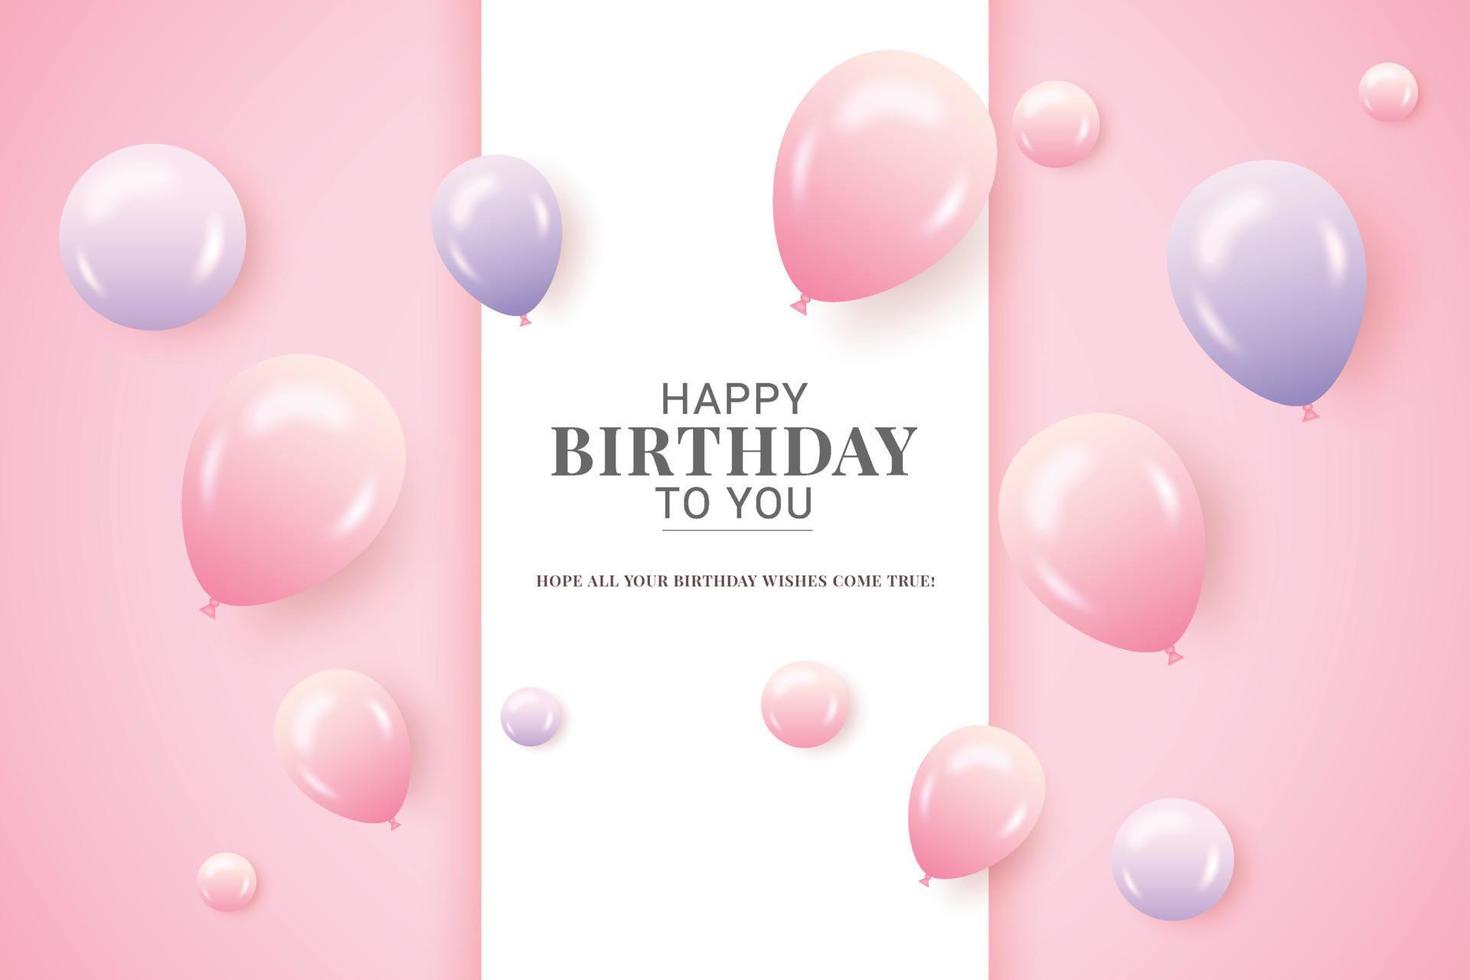 Happy Birthday with pink purple balloons pink background and birthday text vector